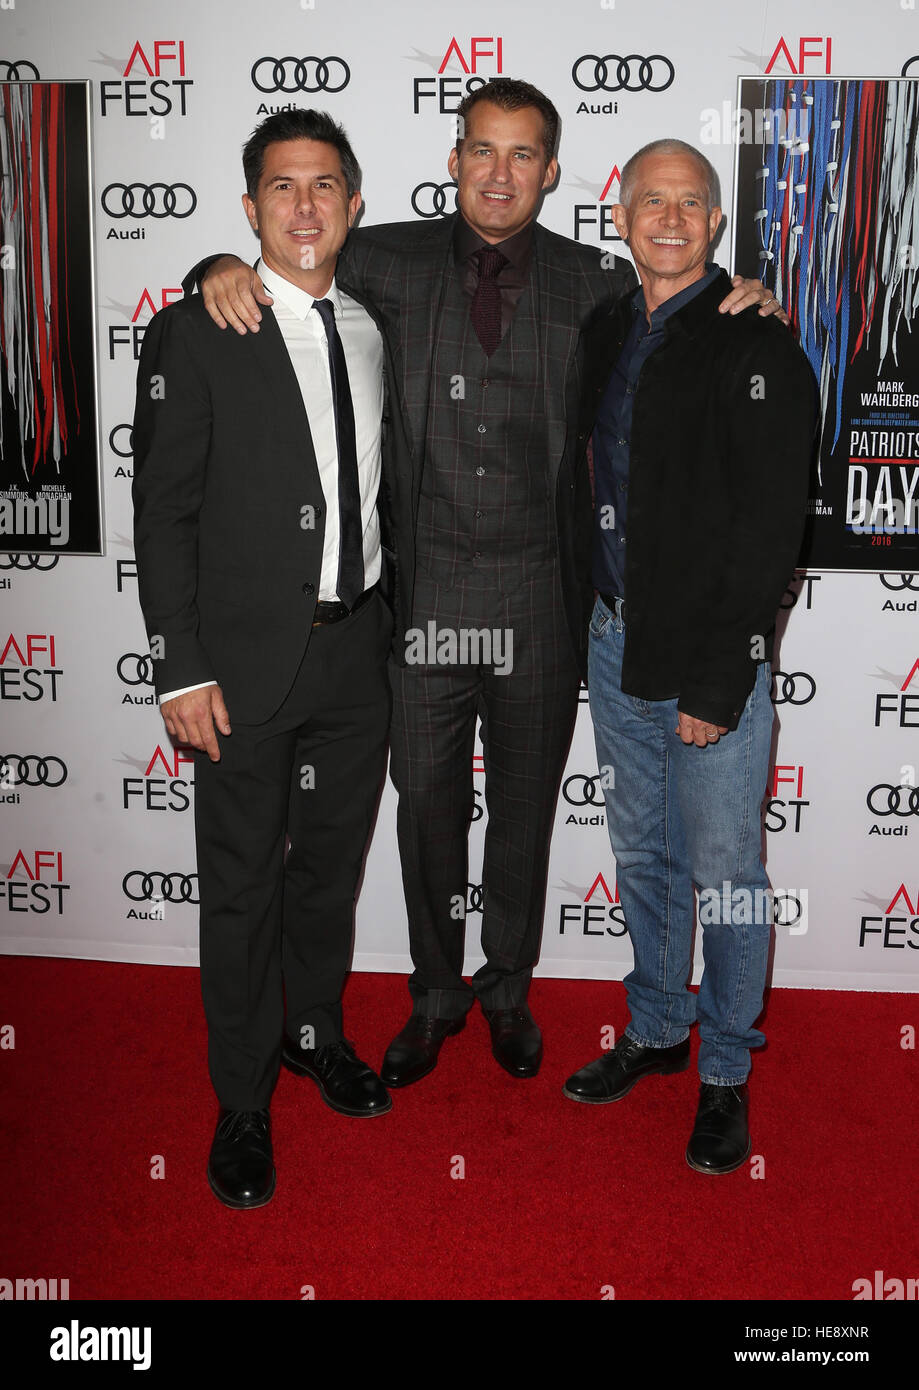 AFI FEST 2016 - Closing Gala - Premiere Of 'Patriot's Day'  Featuring: Dylan Clark, Scott Stuber, Hutch Parker Where: Hollywood, California, United States When: 17 Nov 2016 Credit: FayesVision/WENN.com Stock Photo